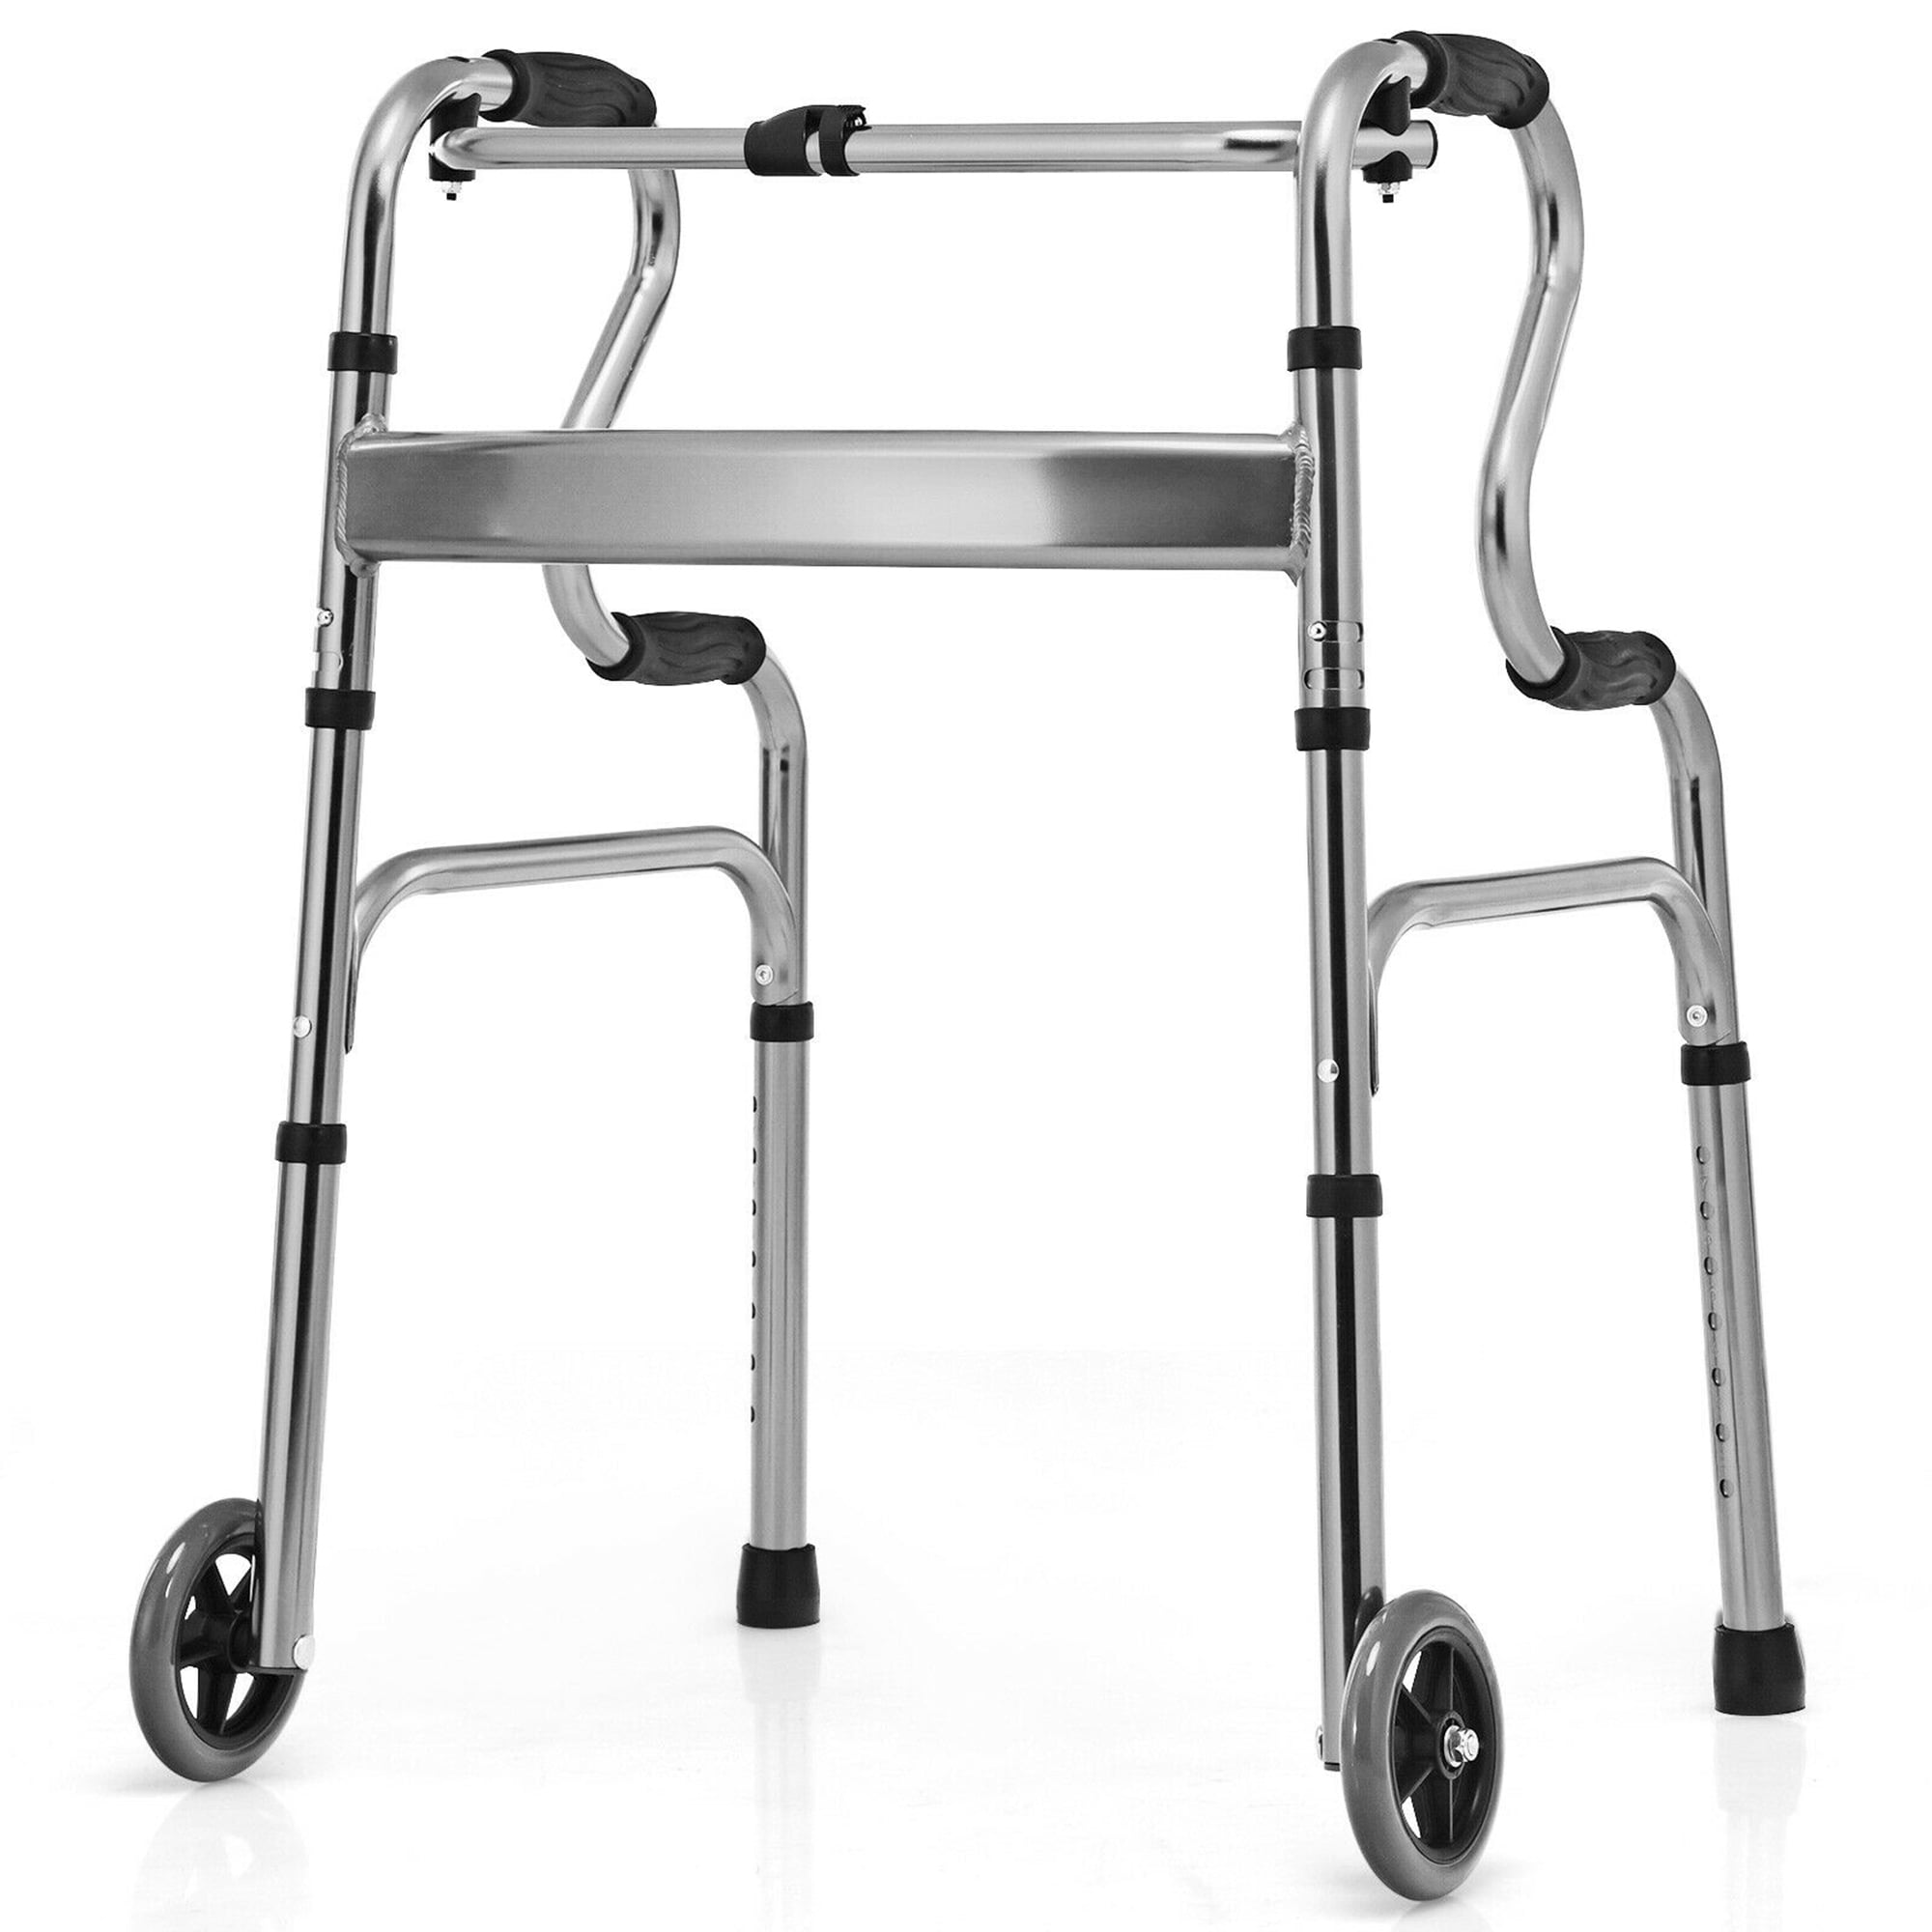 Designed in Accordance with Human Body Motion Foldable Non-Slip Handle Aluminum Alloy Frame Size: 66X45X76-96Cm,A,Auxiliary CTO Walking Frame 